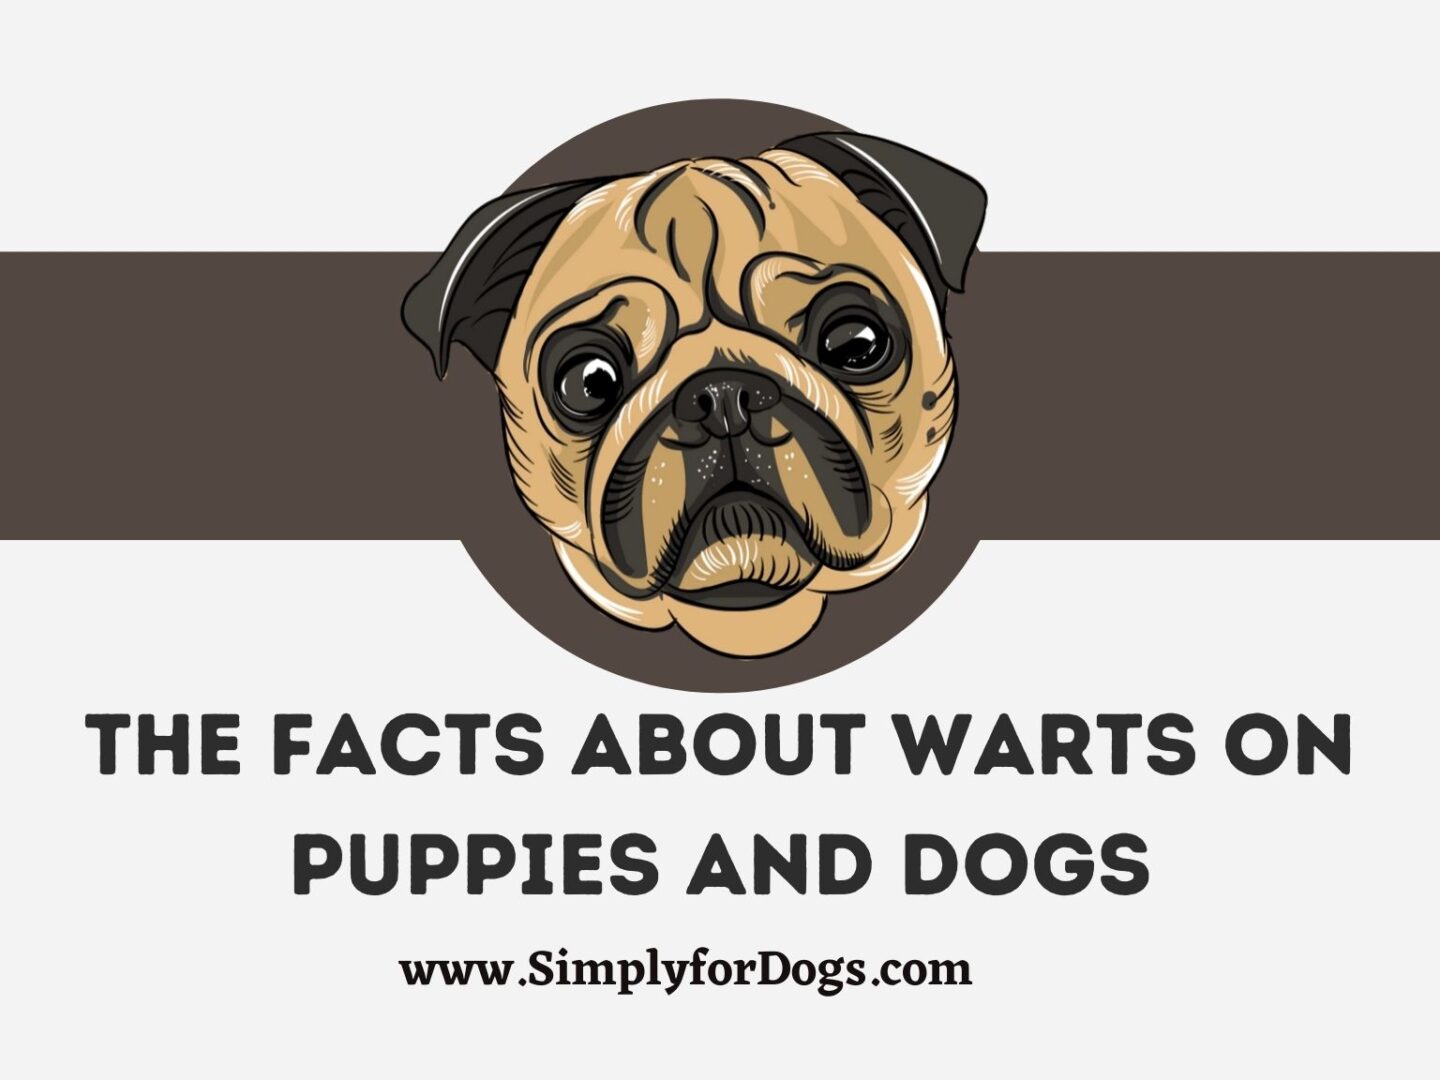 The Facts About Warts on Puppies and Dogs